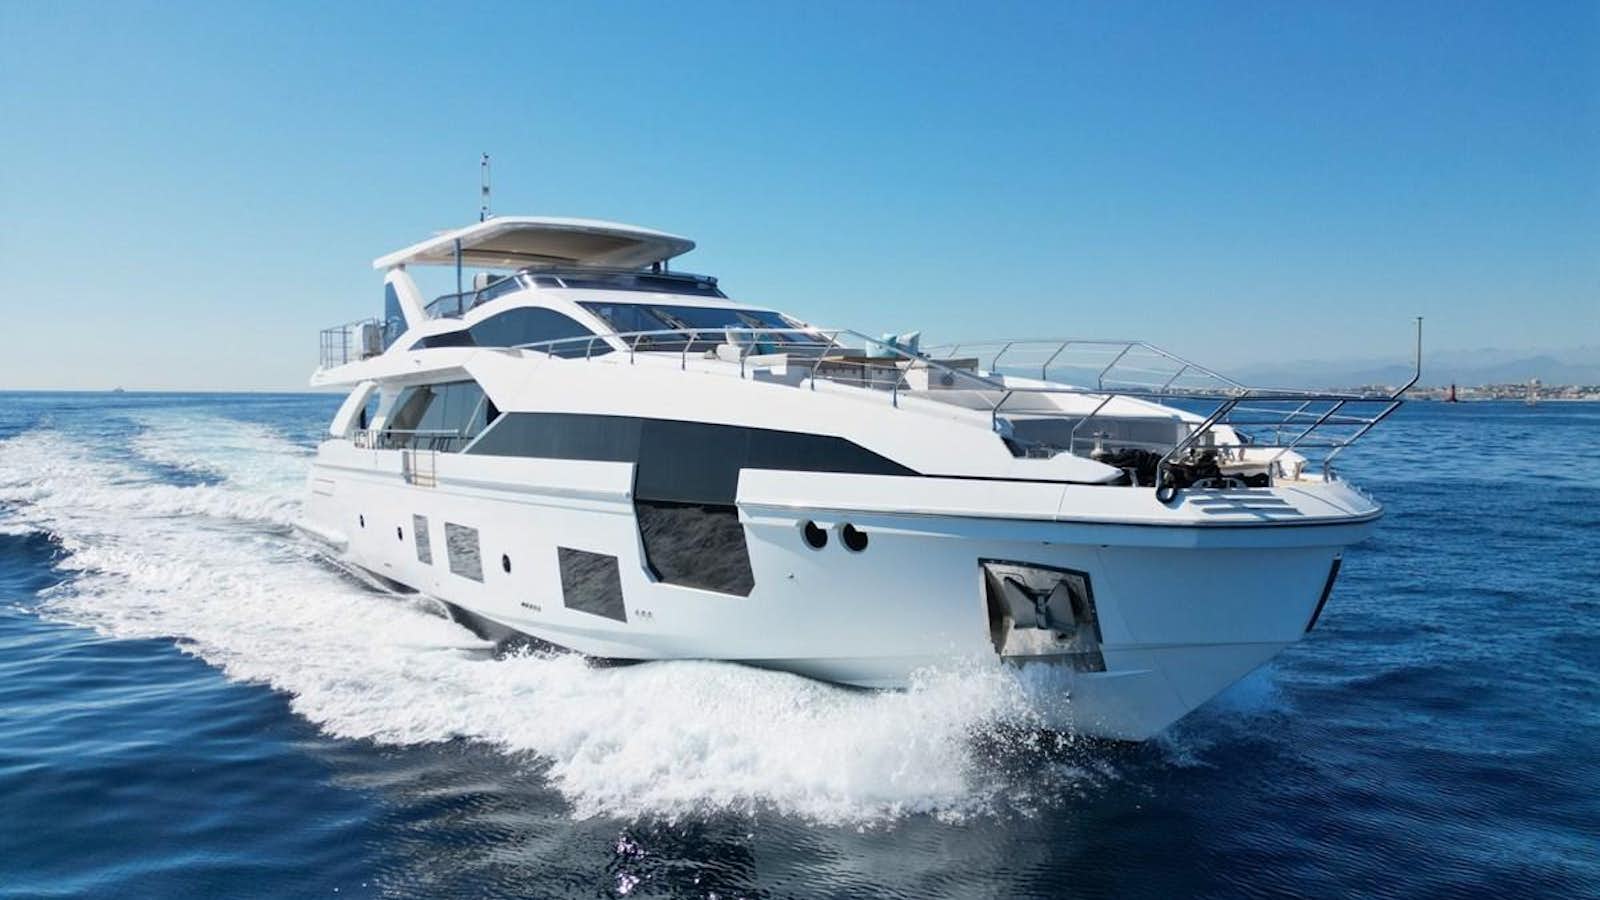 Watch Video for GRANDE 27M Yacht for Sale